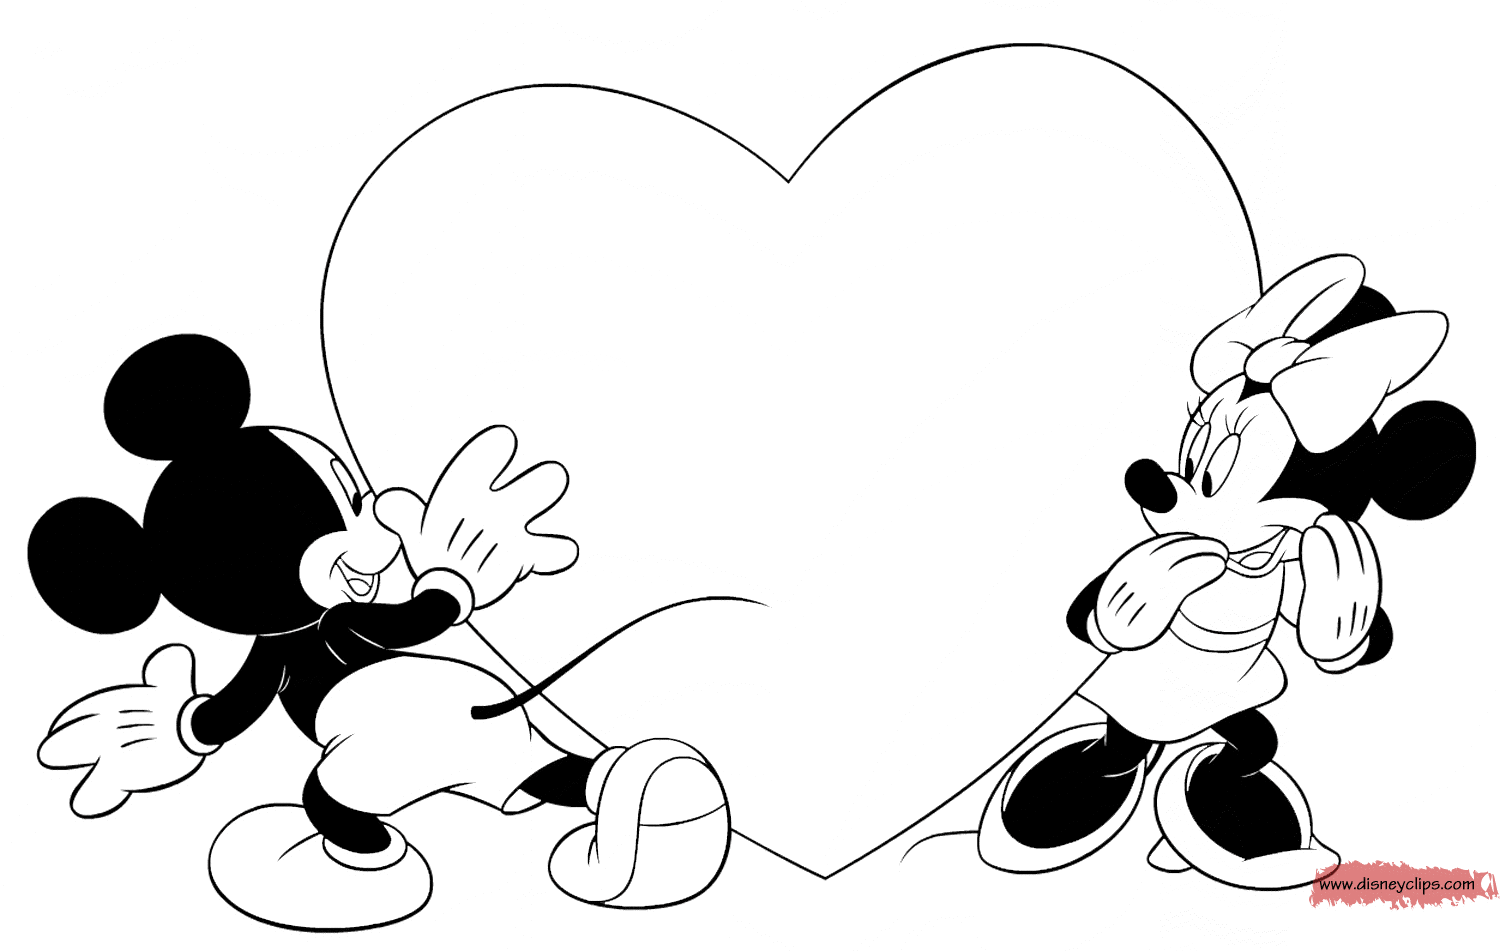 Download Disney Valentine's Day Coloring Pages (2) | Disneyclips.com